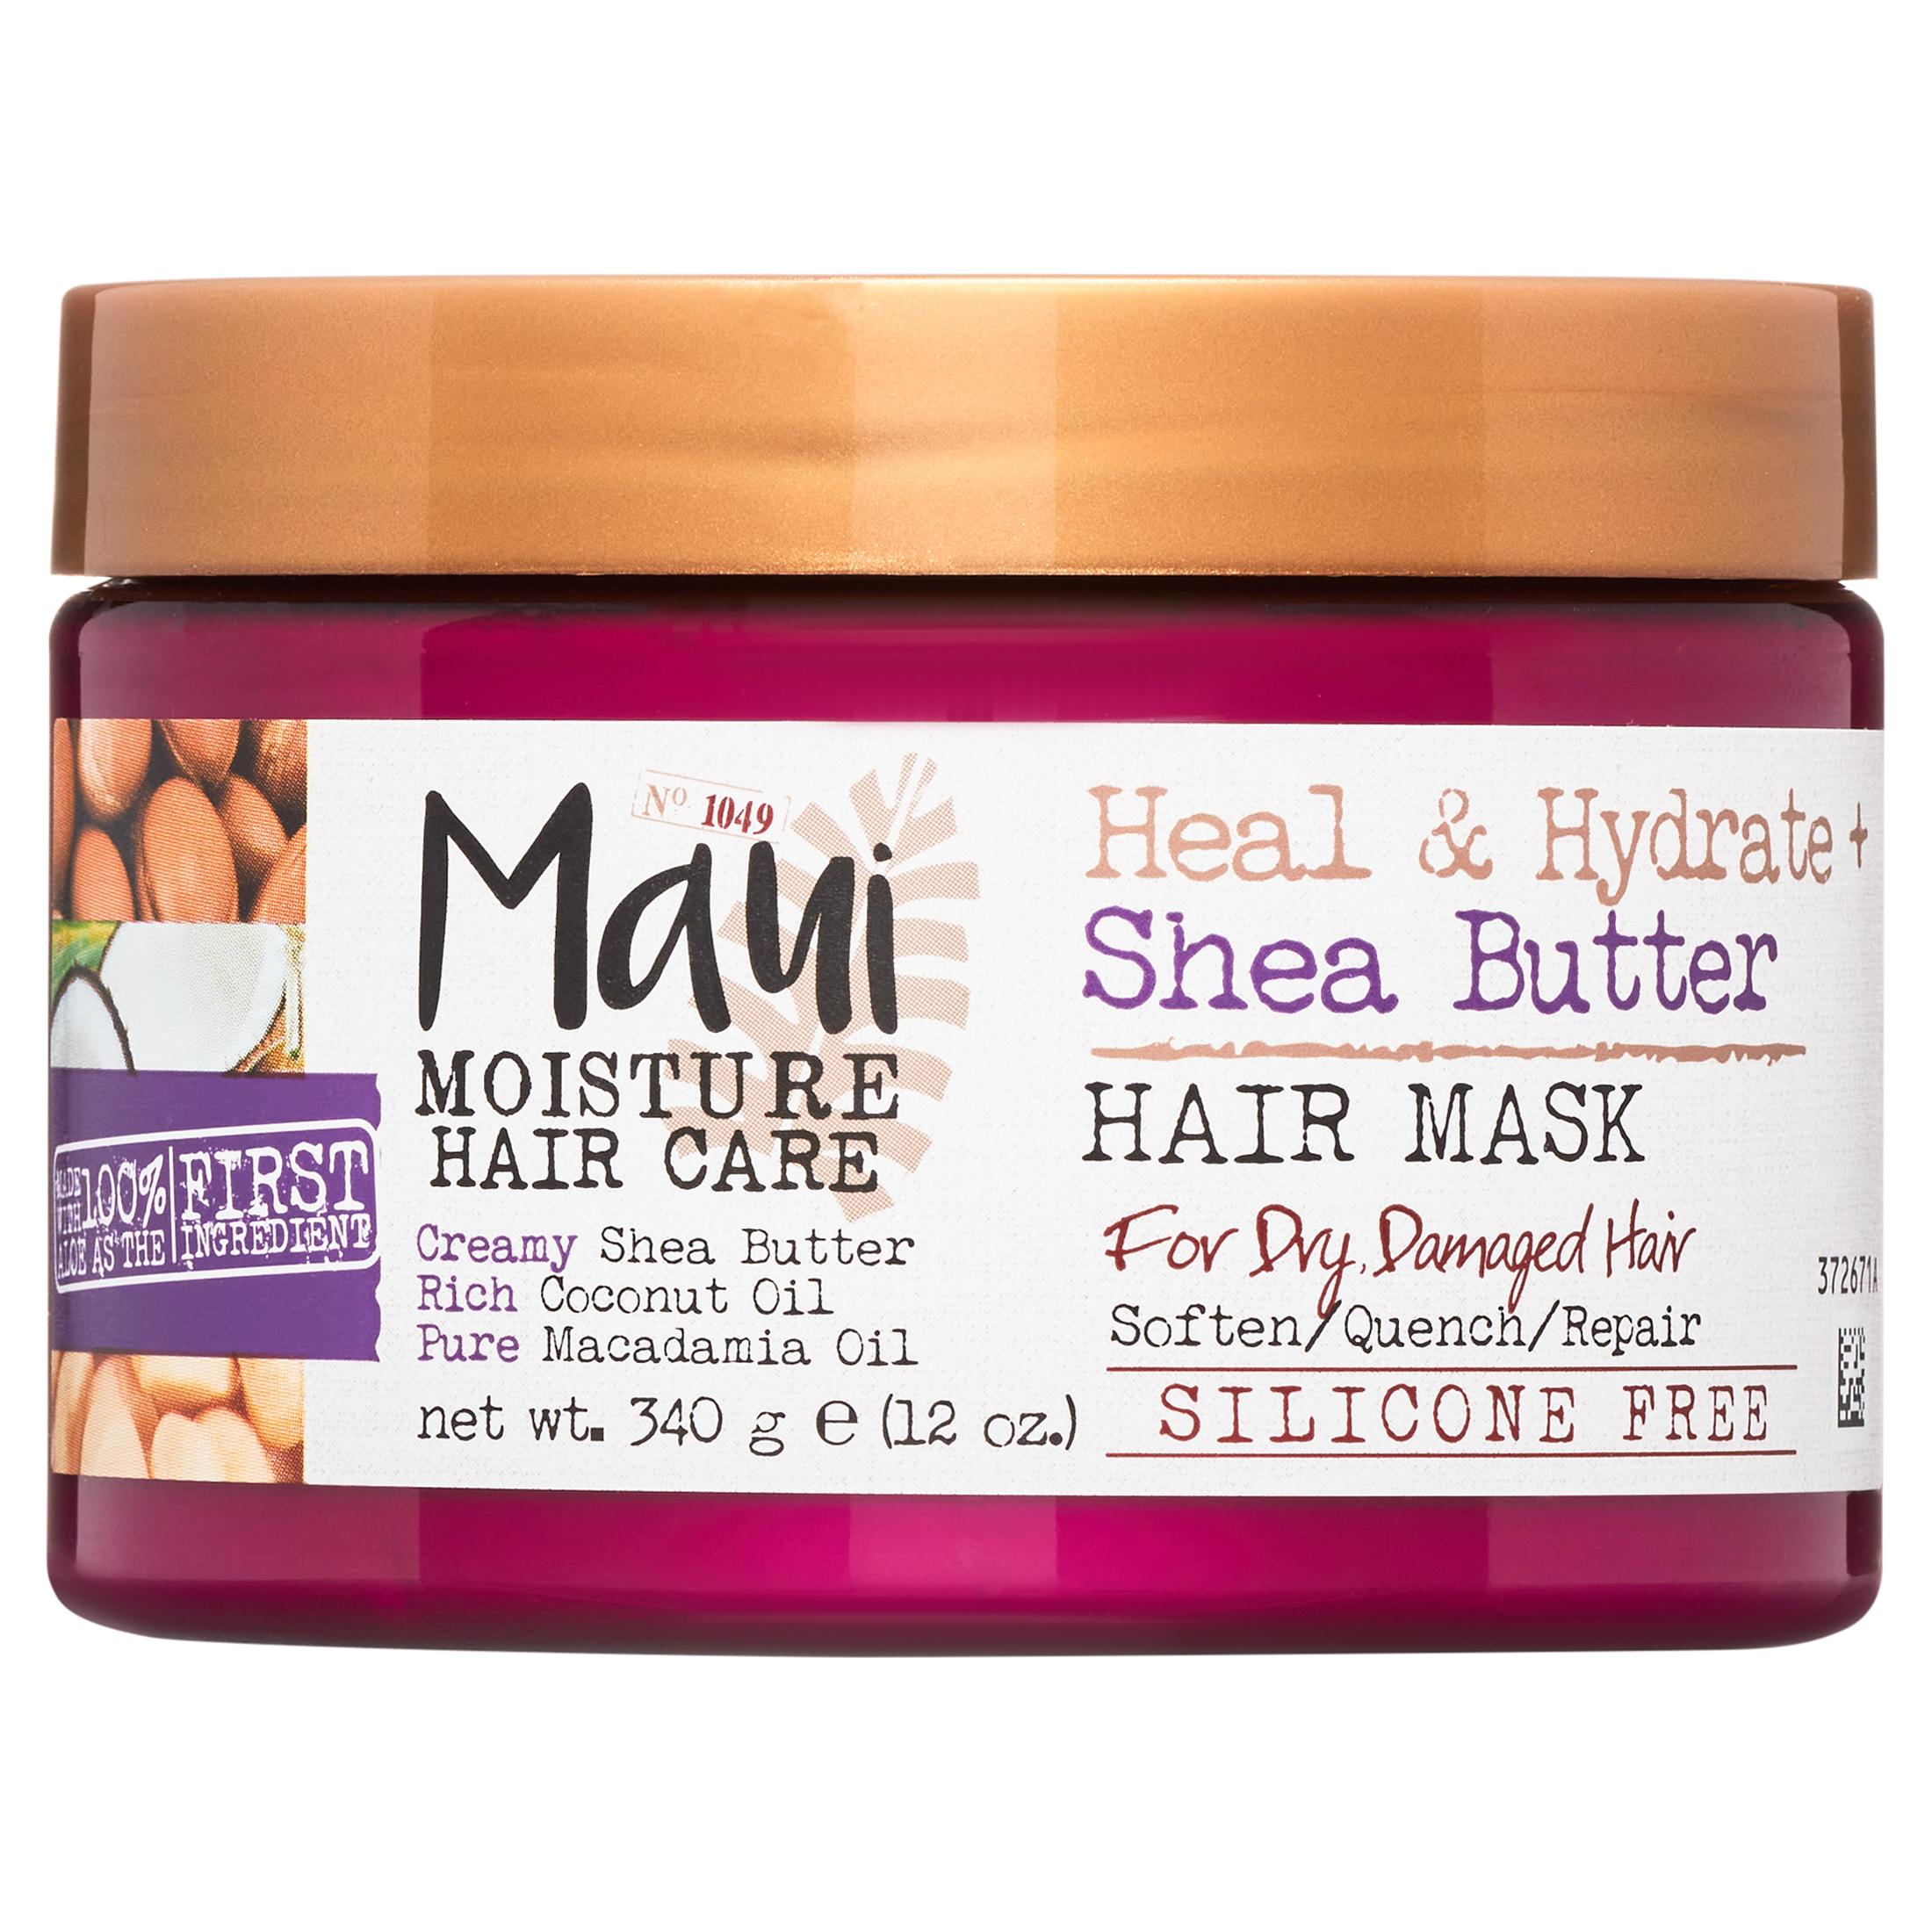 Maui Moisture Heal & Hydrate + Shea Butter Hair Mask & Leave-In Conditioner Treatment, 12 oz - image 1 of 9